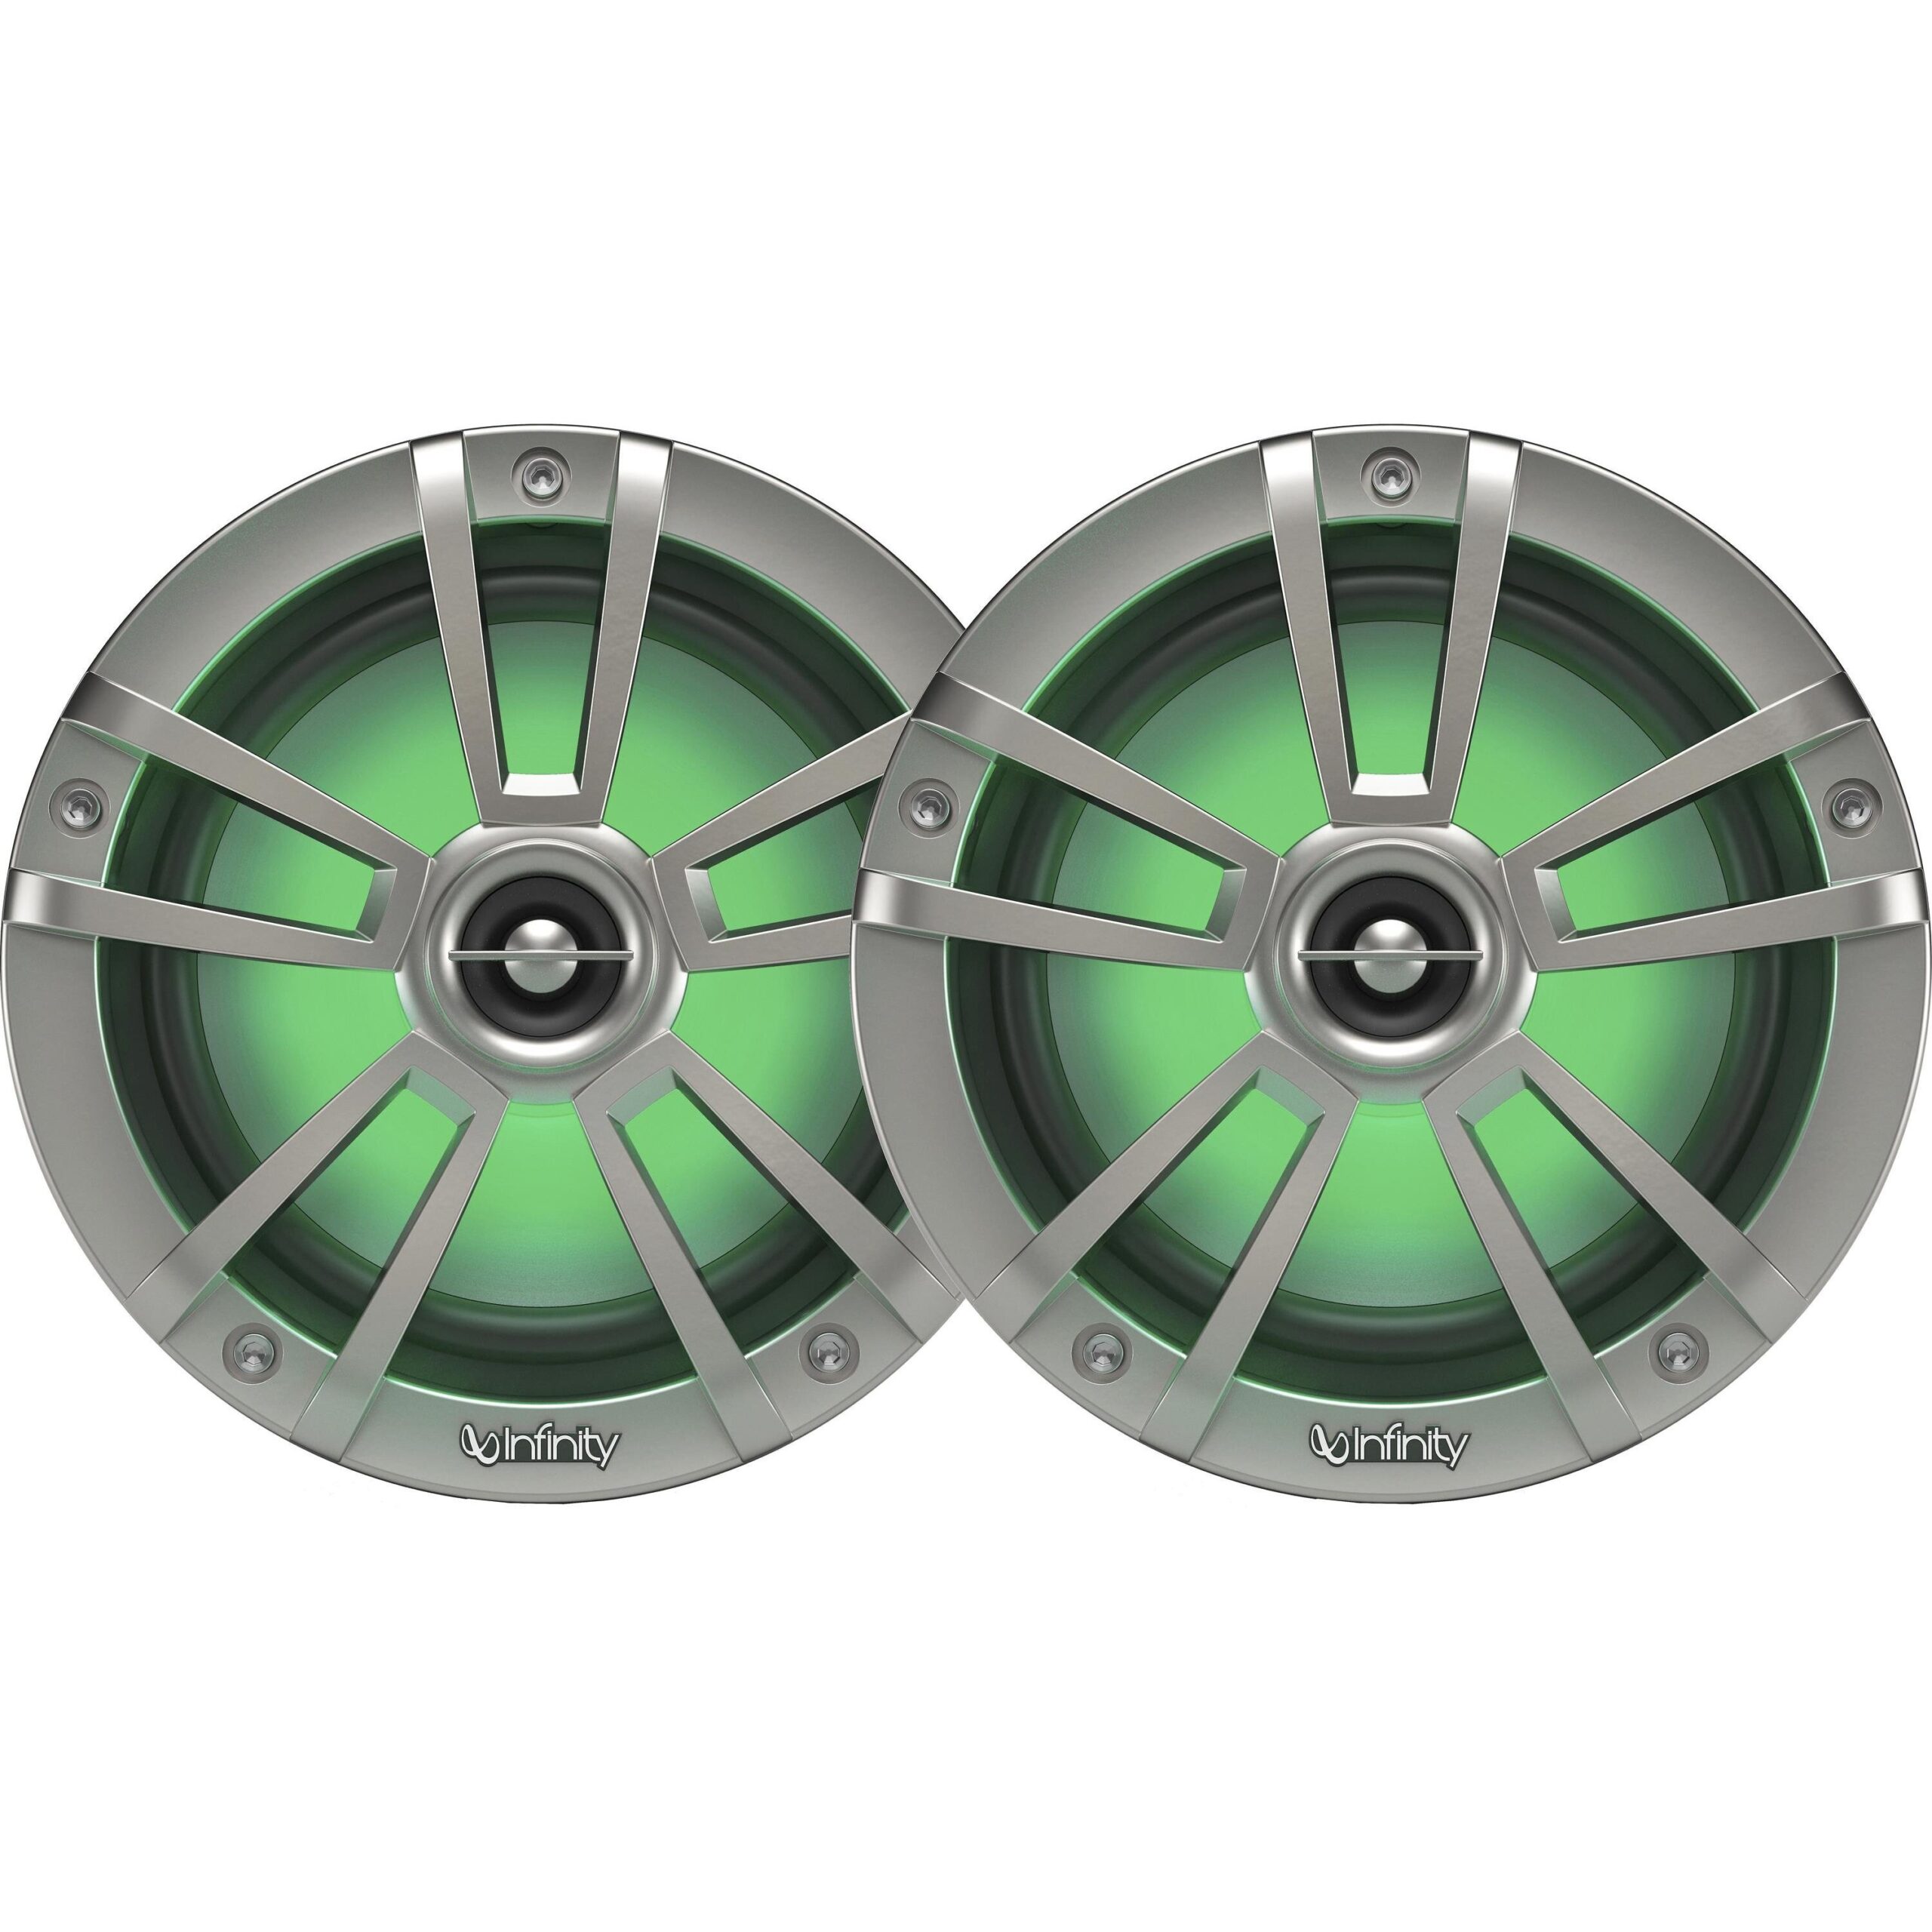 Infinity 622MLT Titanium 6.5" Reference Series Coaxial 225 Watt Waterproof Marine Speakers With RGB LED Accent Lighting